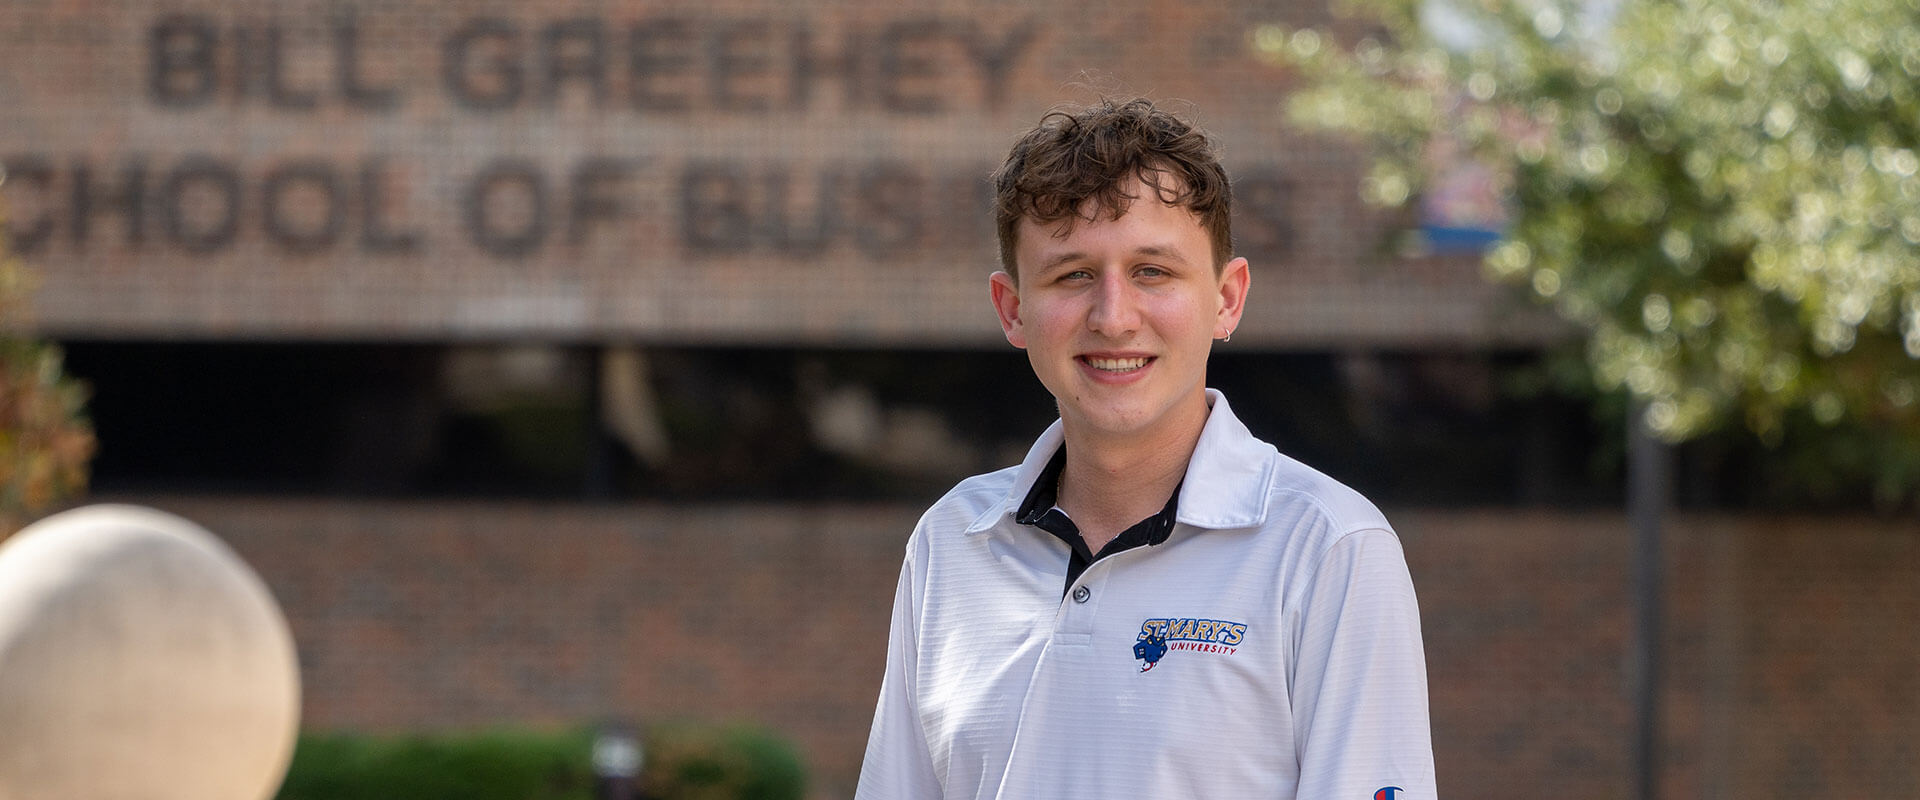 Zane Smith stands in front of the Greehey School of Business.